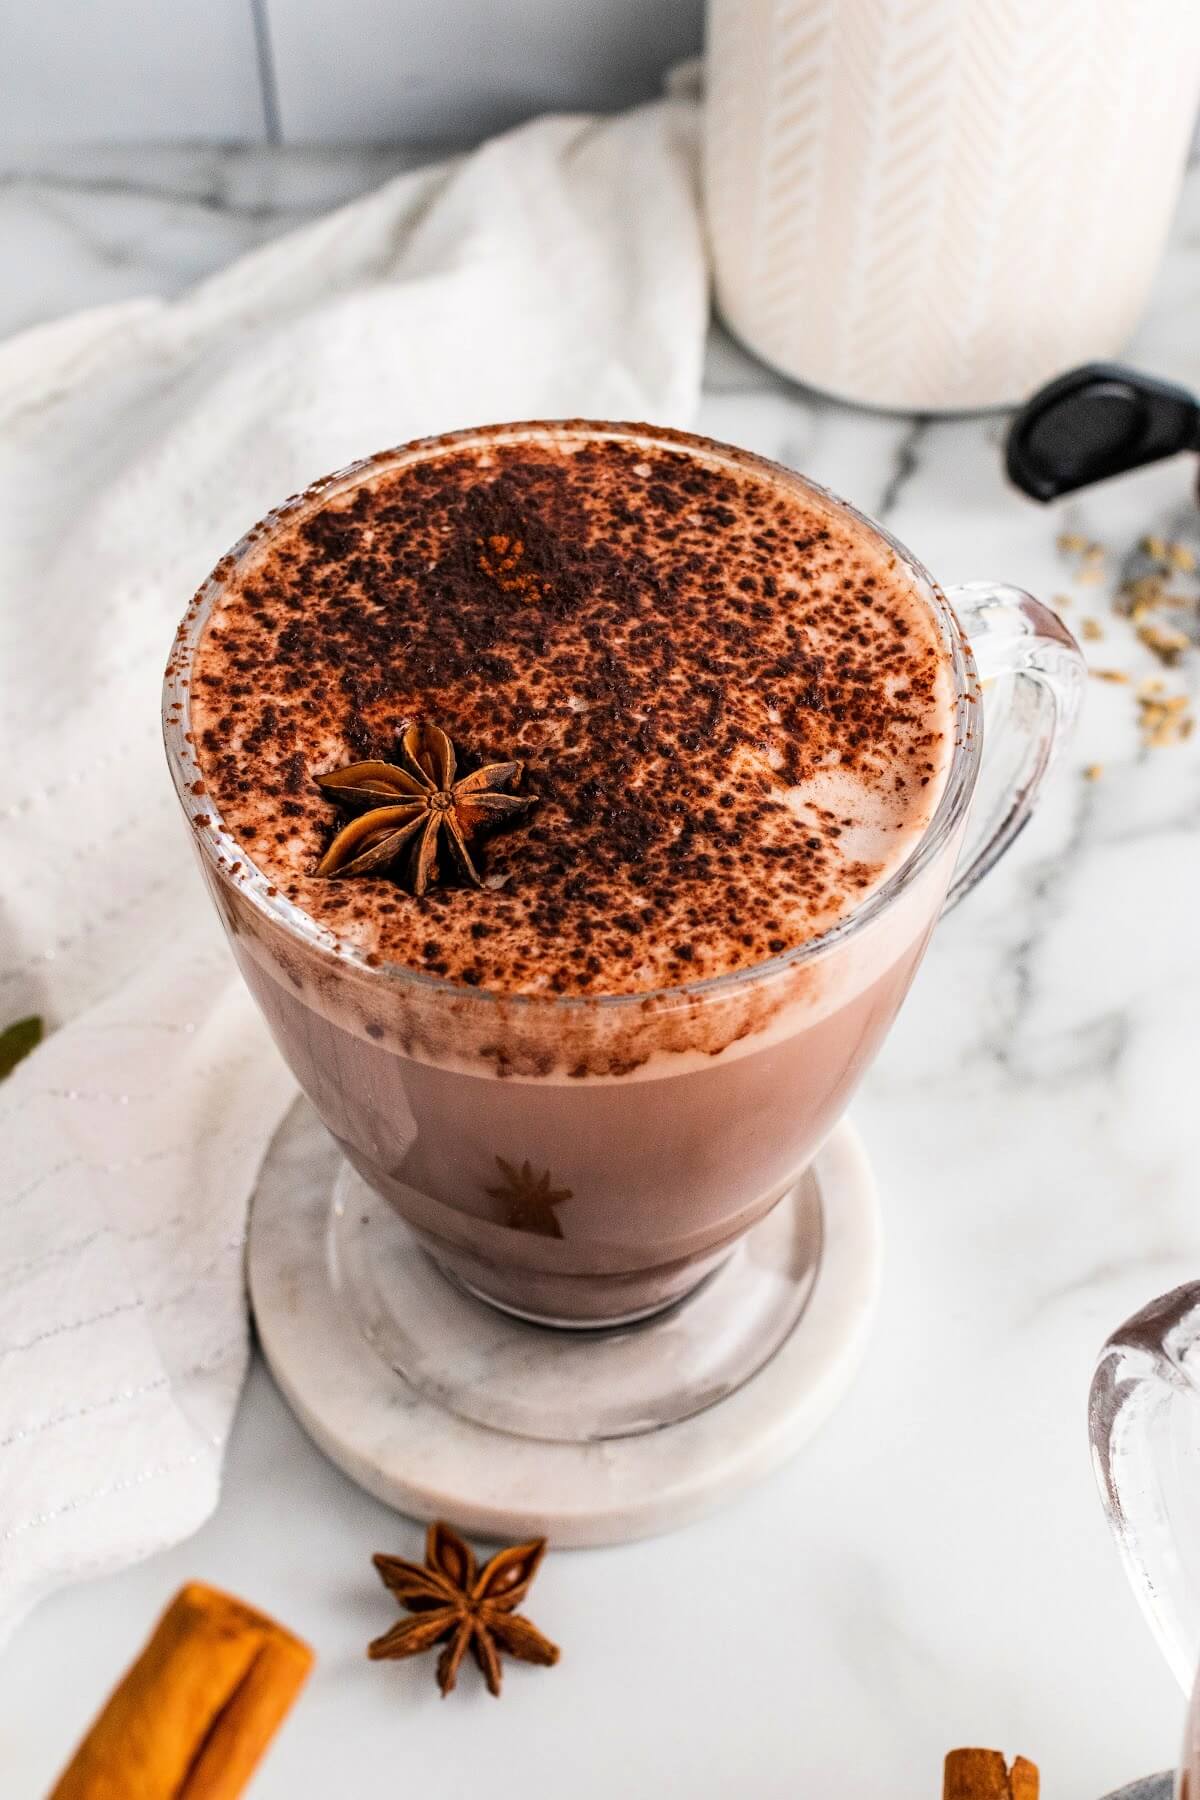 A glass mug filled with hot chocolate and garnished with ground cinnamon and a star anise pod, sitting on a marble coaster with dried star anise pods, cinnamon sticks and fennel seeds sitting around the mug and counter and a white kitchen towel to the side.